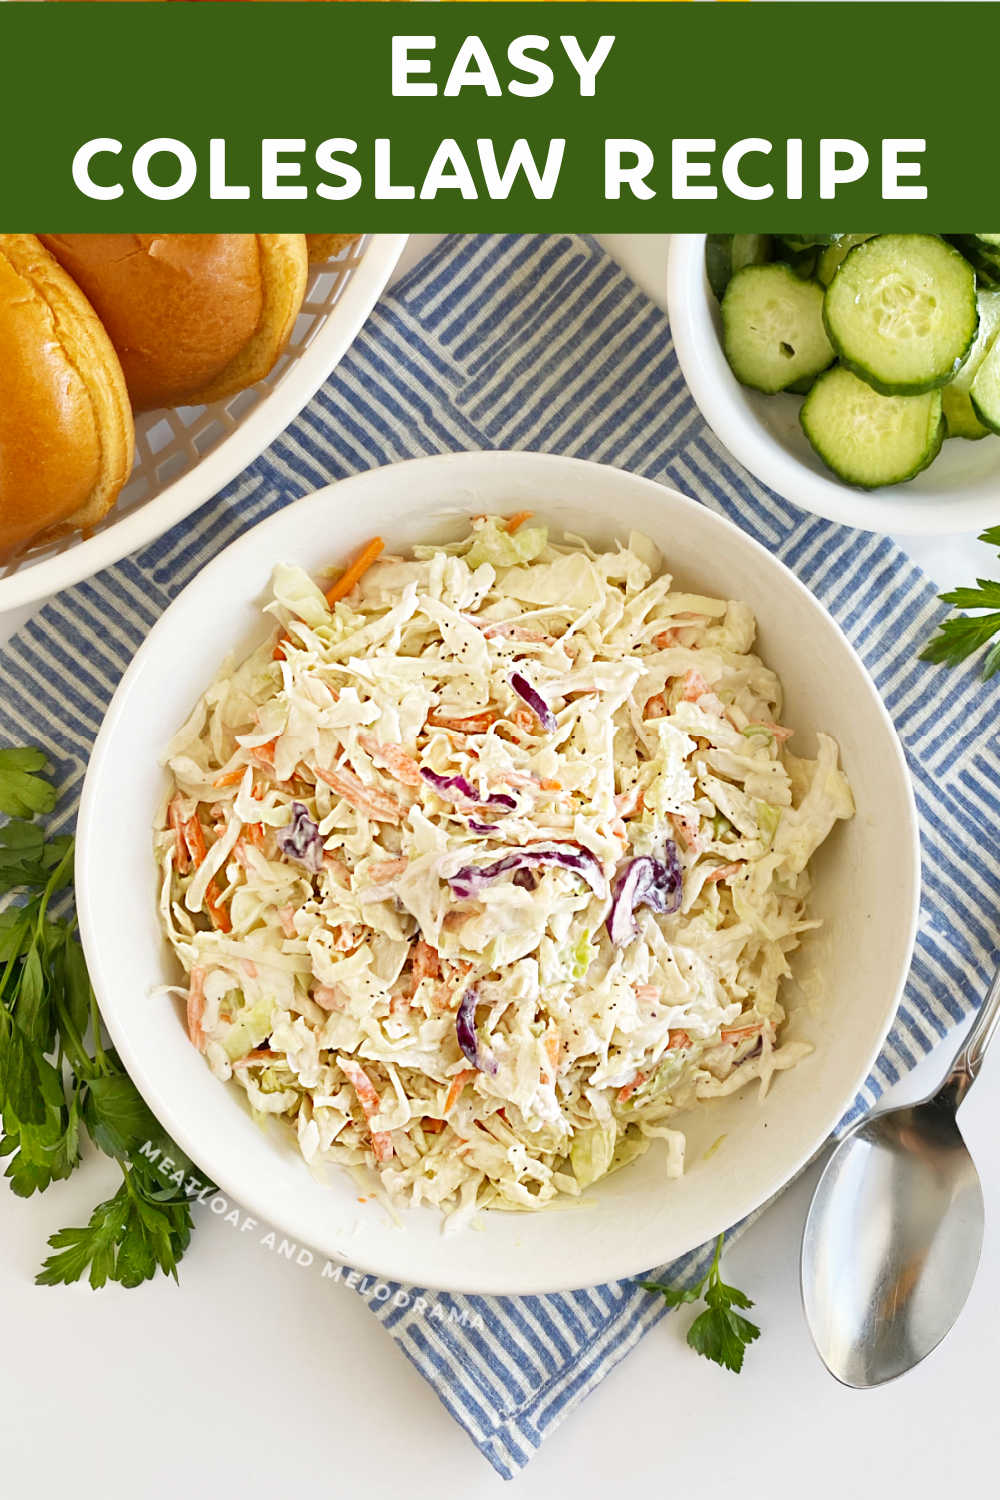 Mom's Best Coleslaw Recipe uses vinegar and mayonnaise for a classic homemade side dish or sandwich topper that's easy, creamy and delicious -- just like Mom used to make!  Once you make coleslaw from scratch, you'll never go back to storebought again! via @meamel